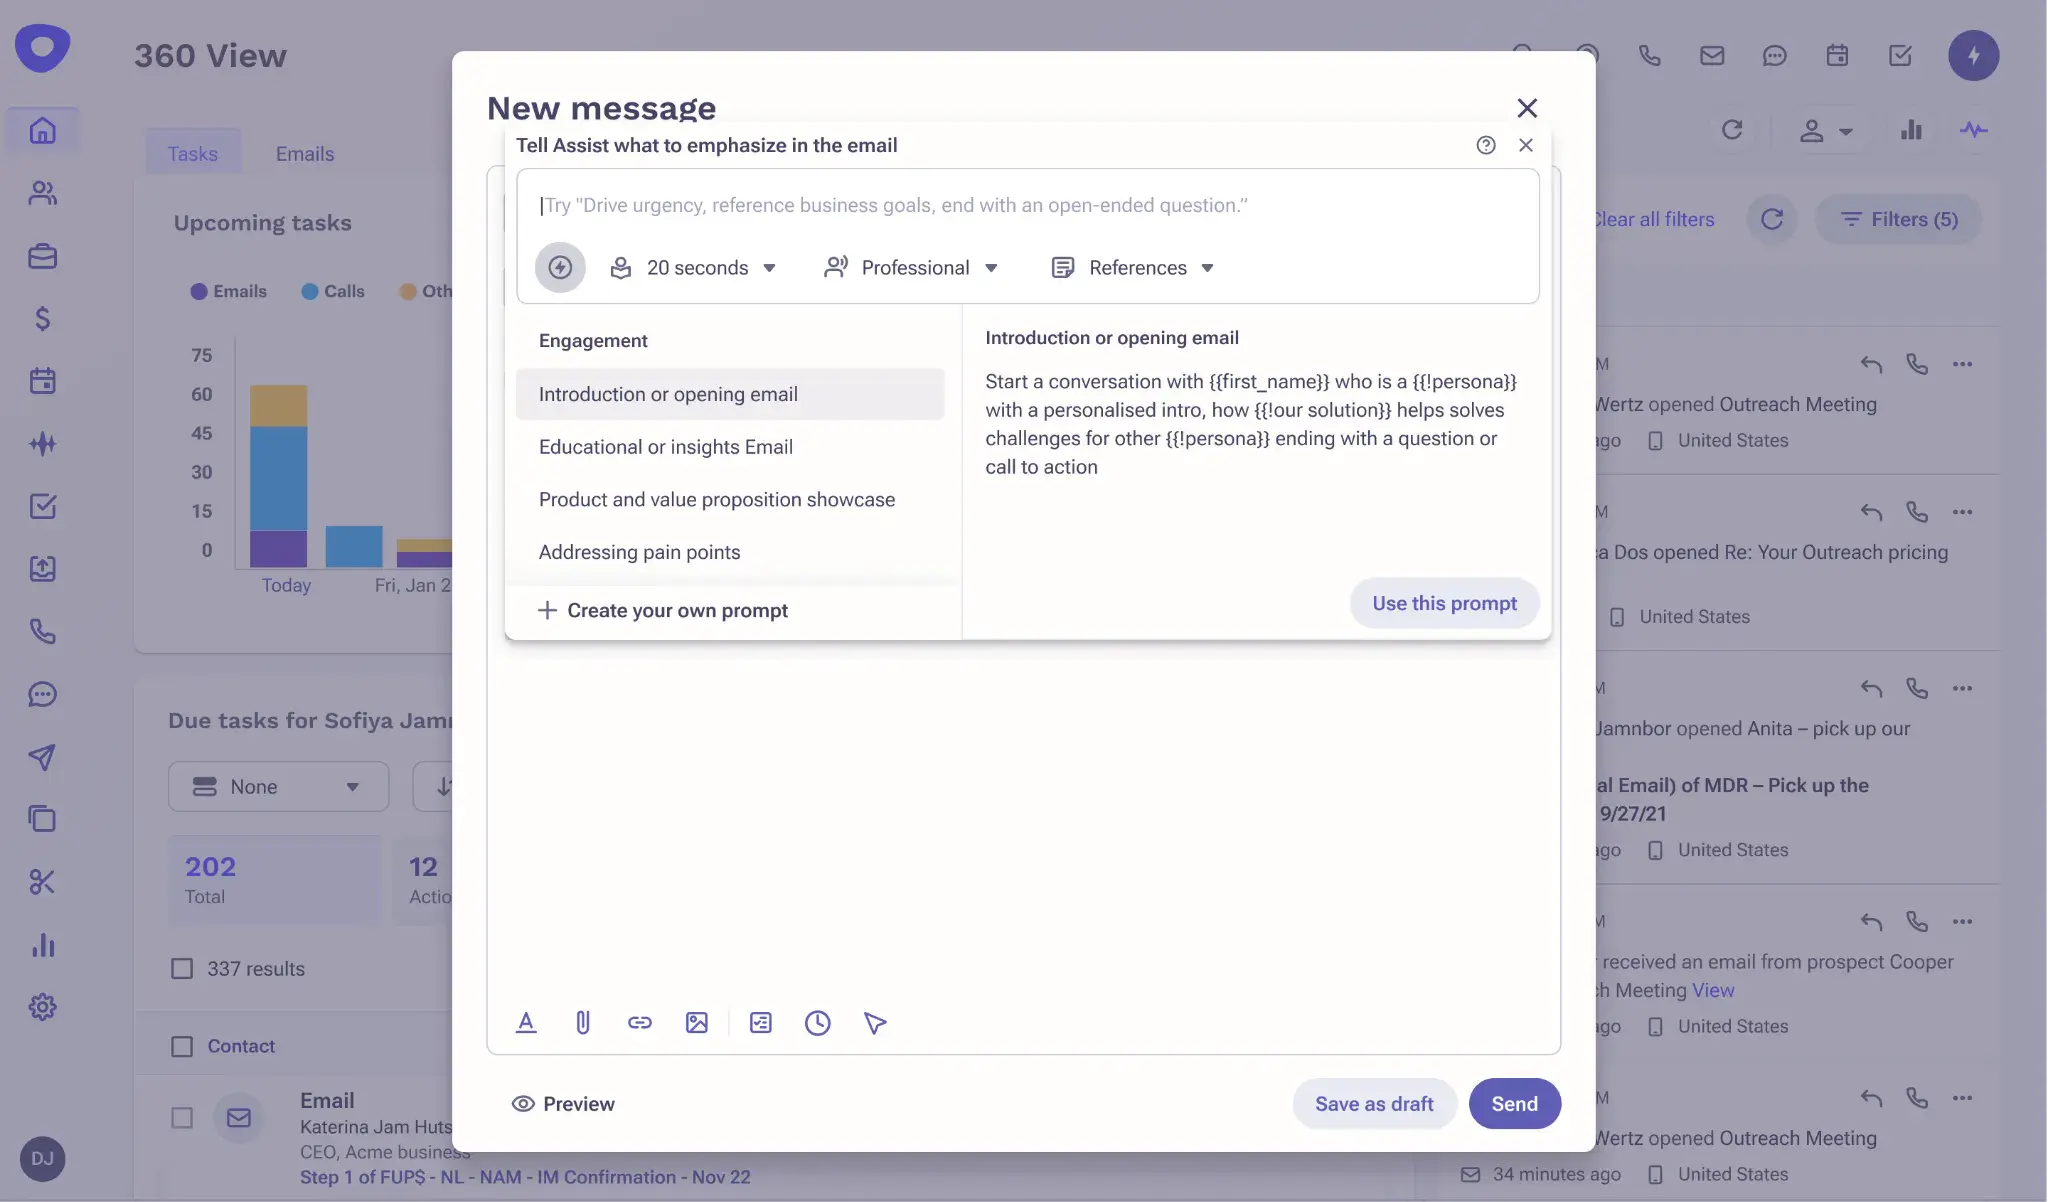 Outreach.io cold email tool interface showcasing new message window with AI assistant features.